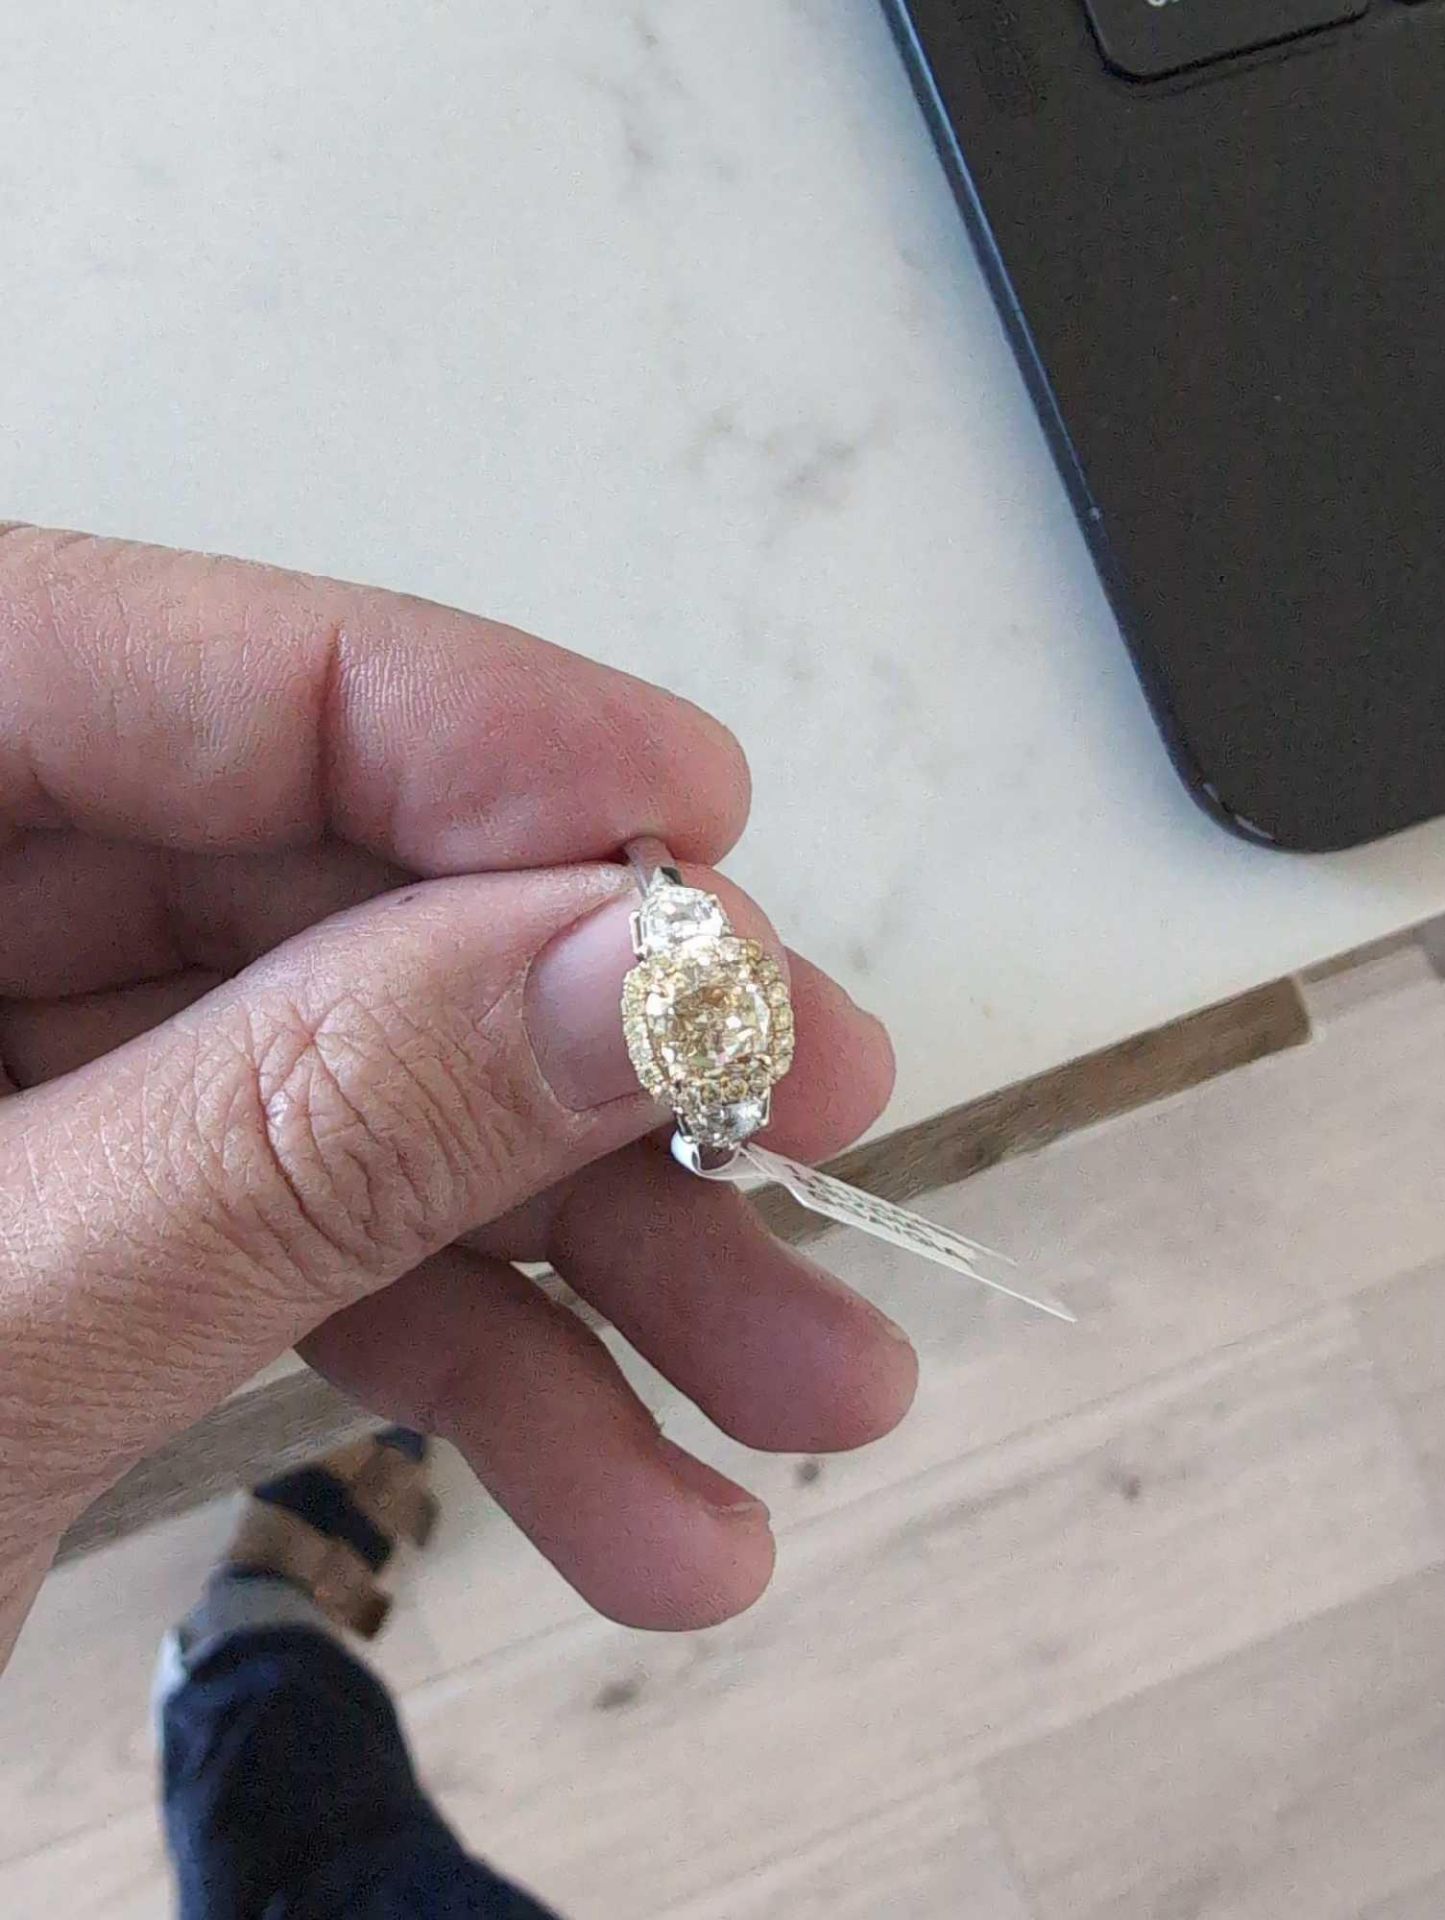 18KT Two Tone Gold 2.23 CTW Fancy colorless Diamond Ring 1.61ct Center Diamond - Image 2 of 8